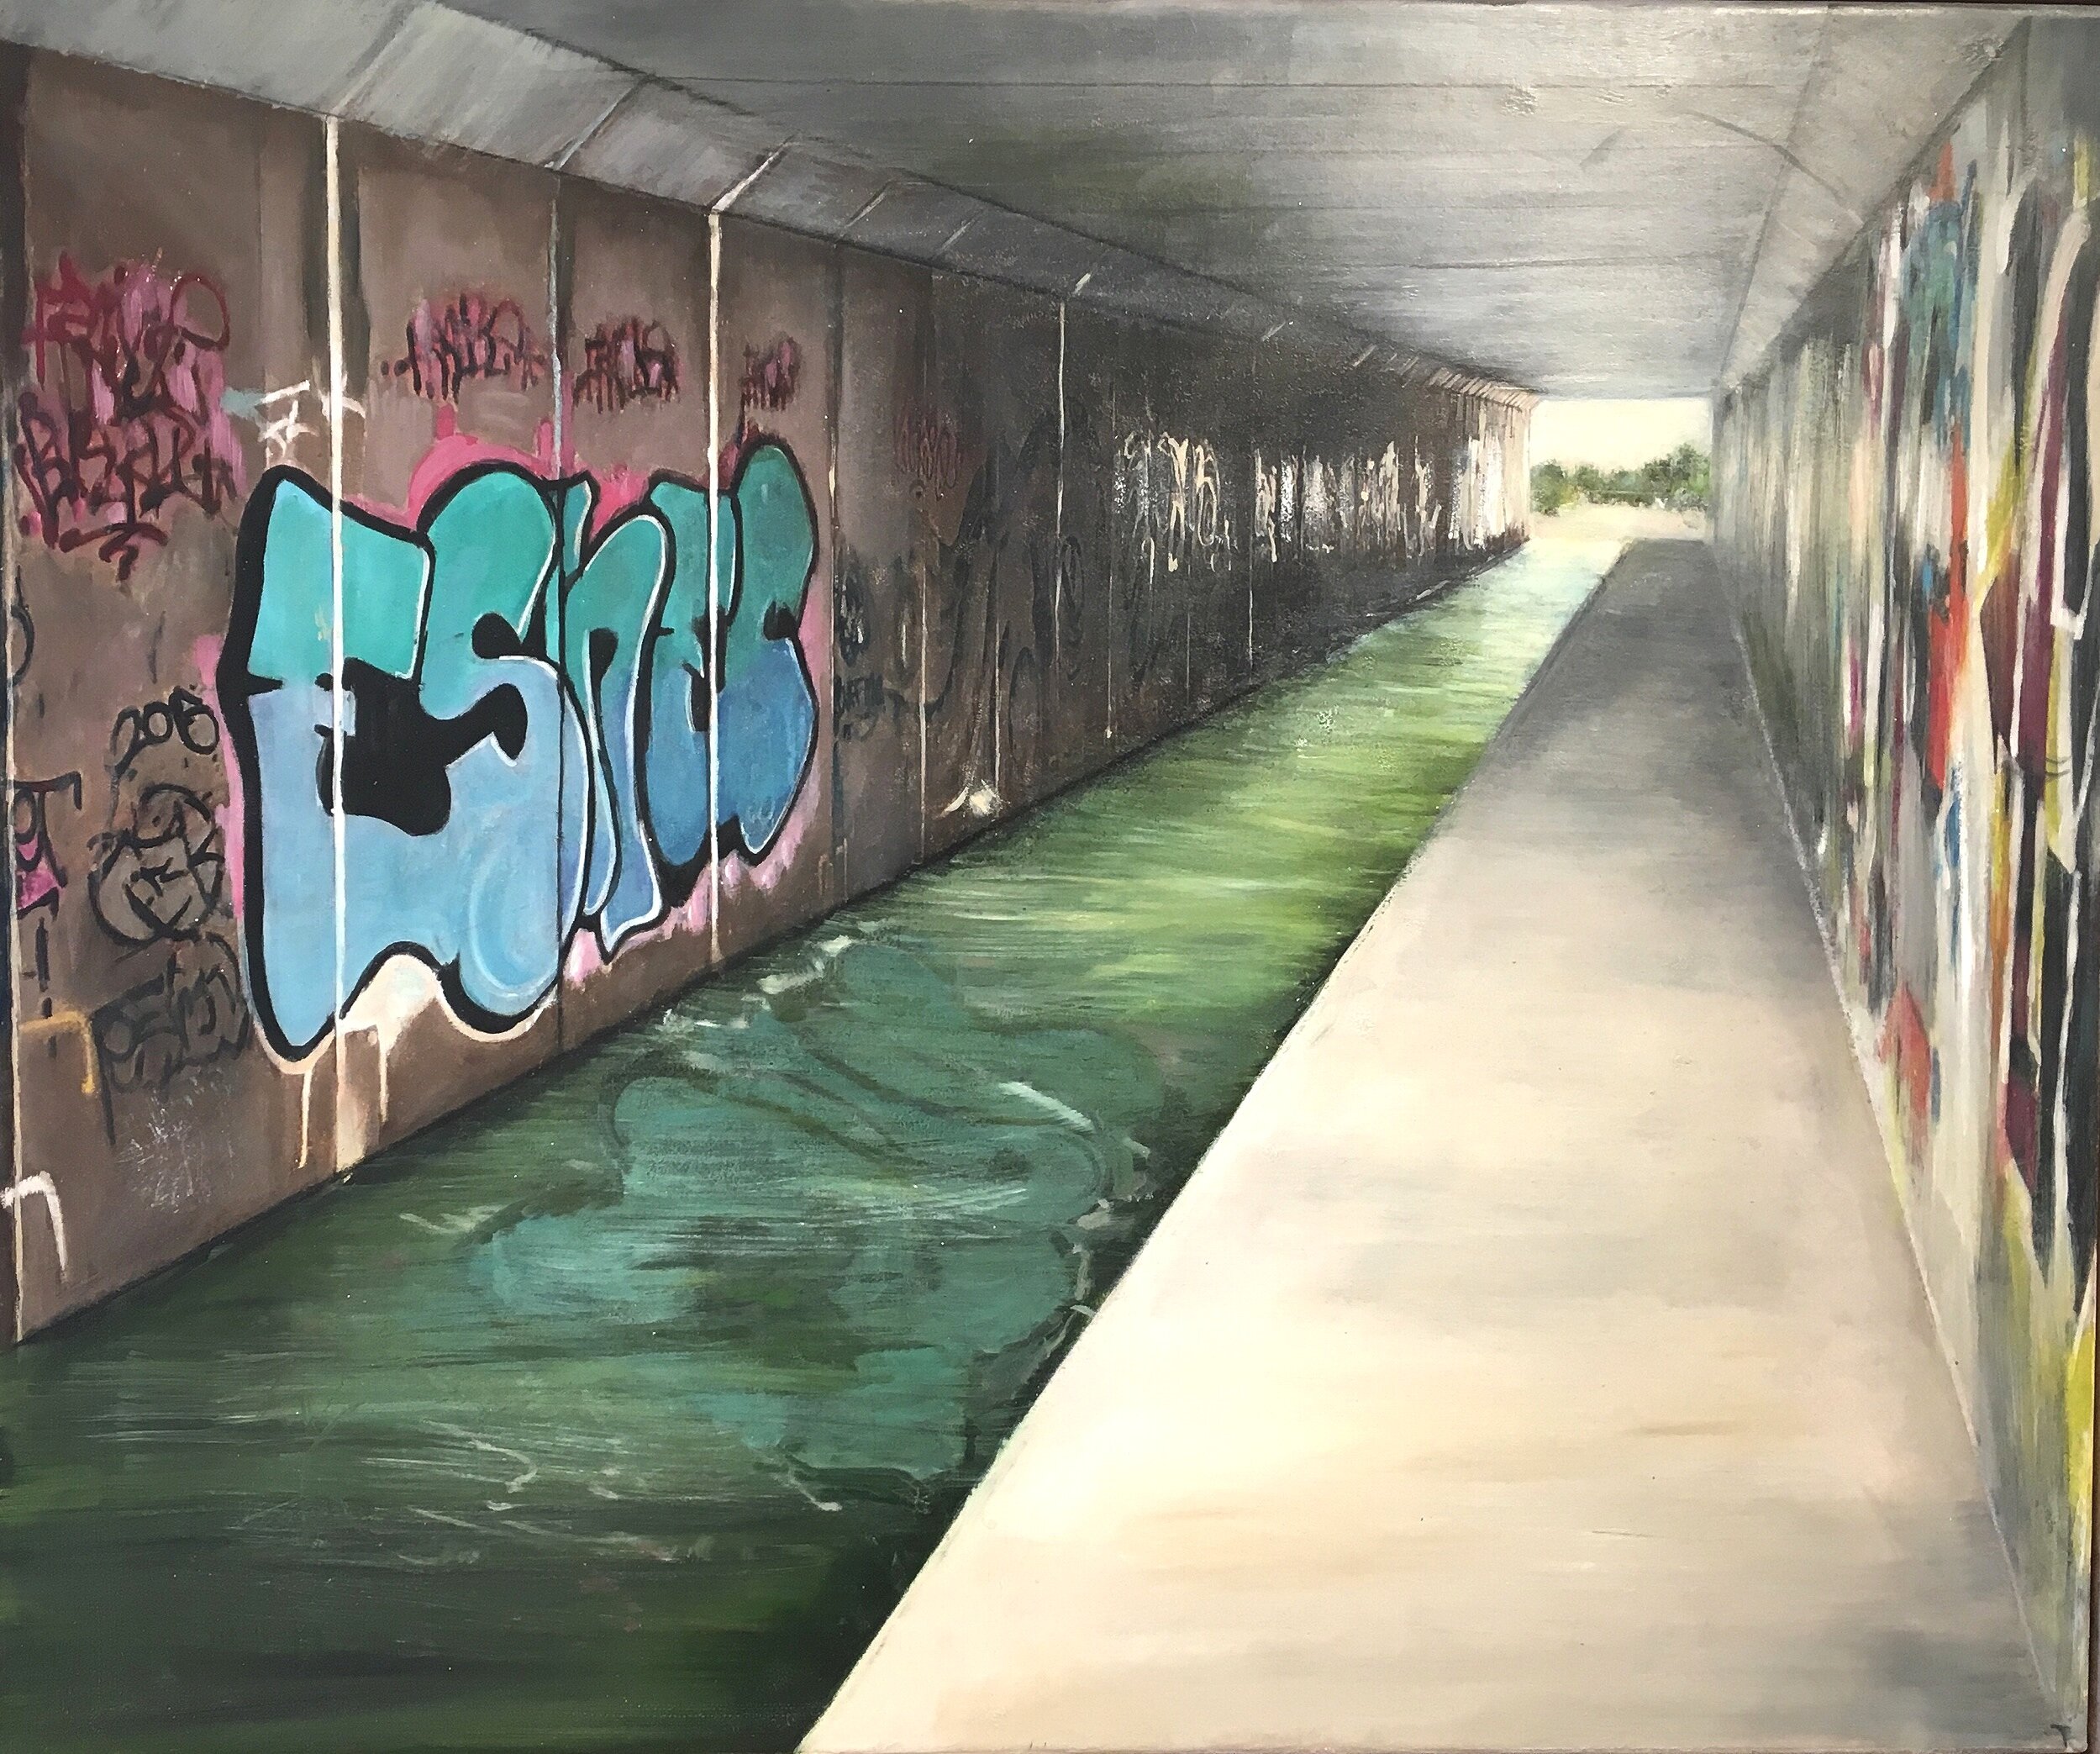   The Tunnel  2019  oil and mixed media on canvas  51 x 61 cm   